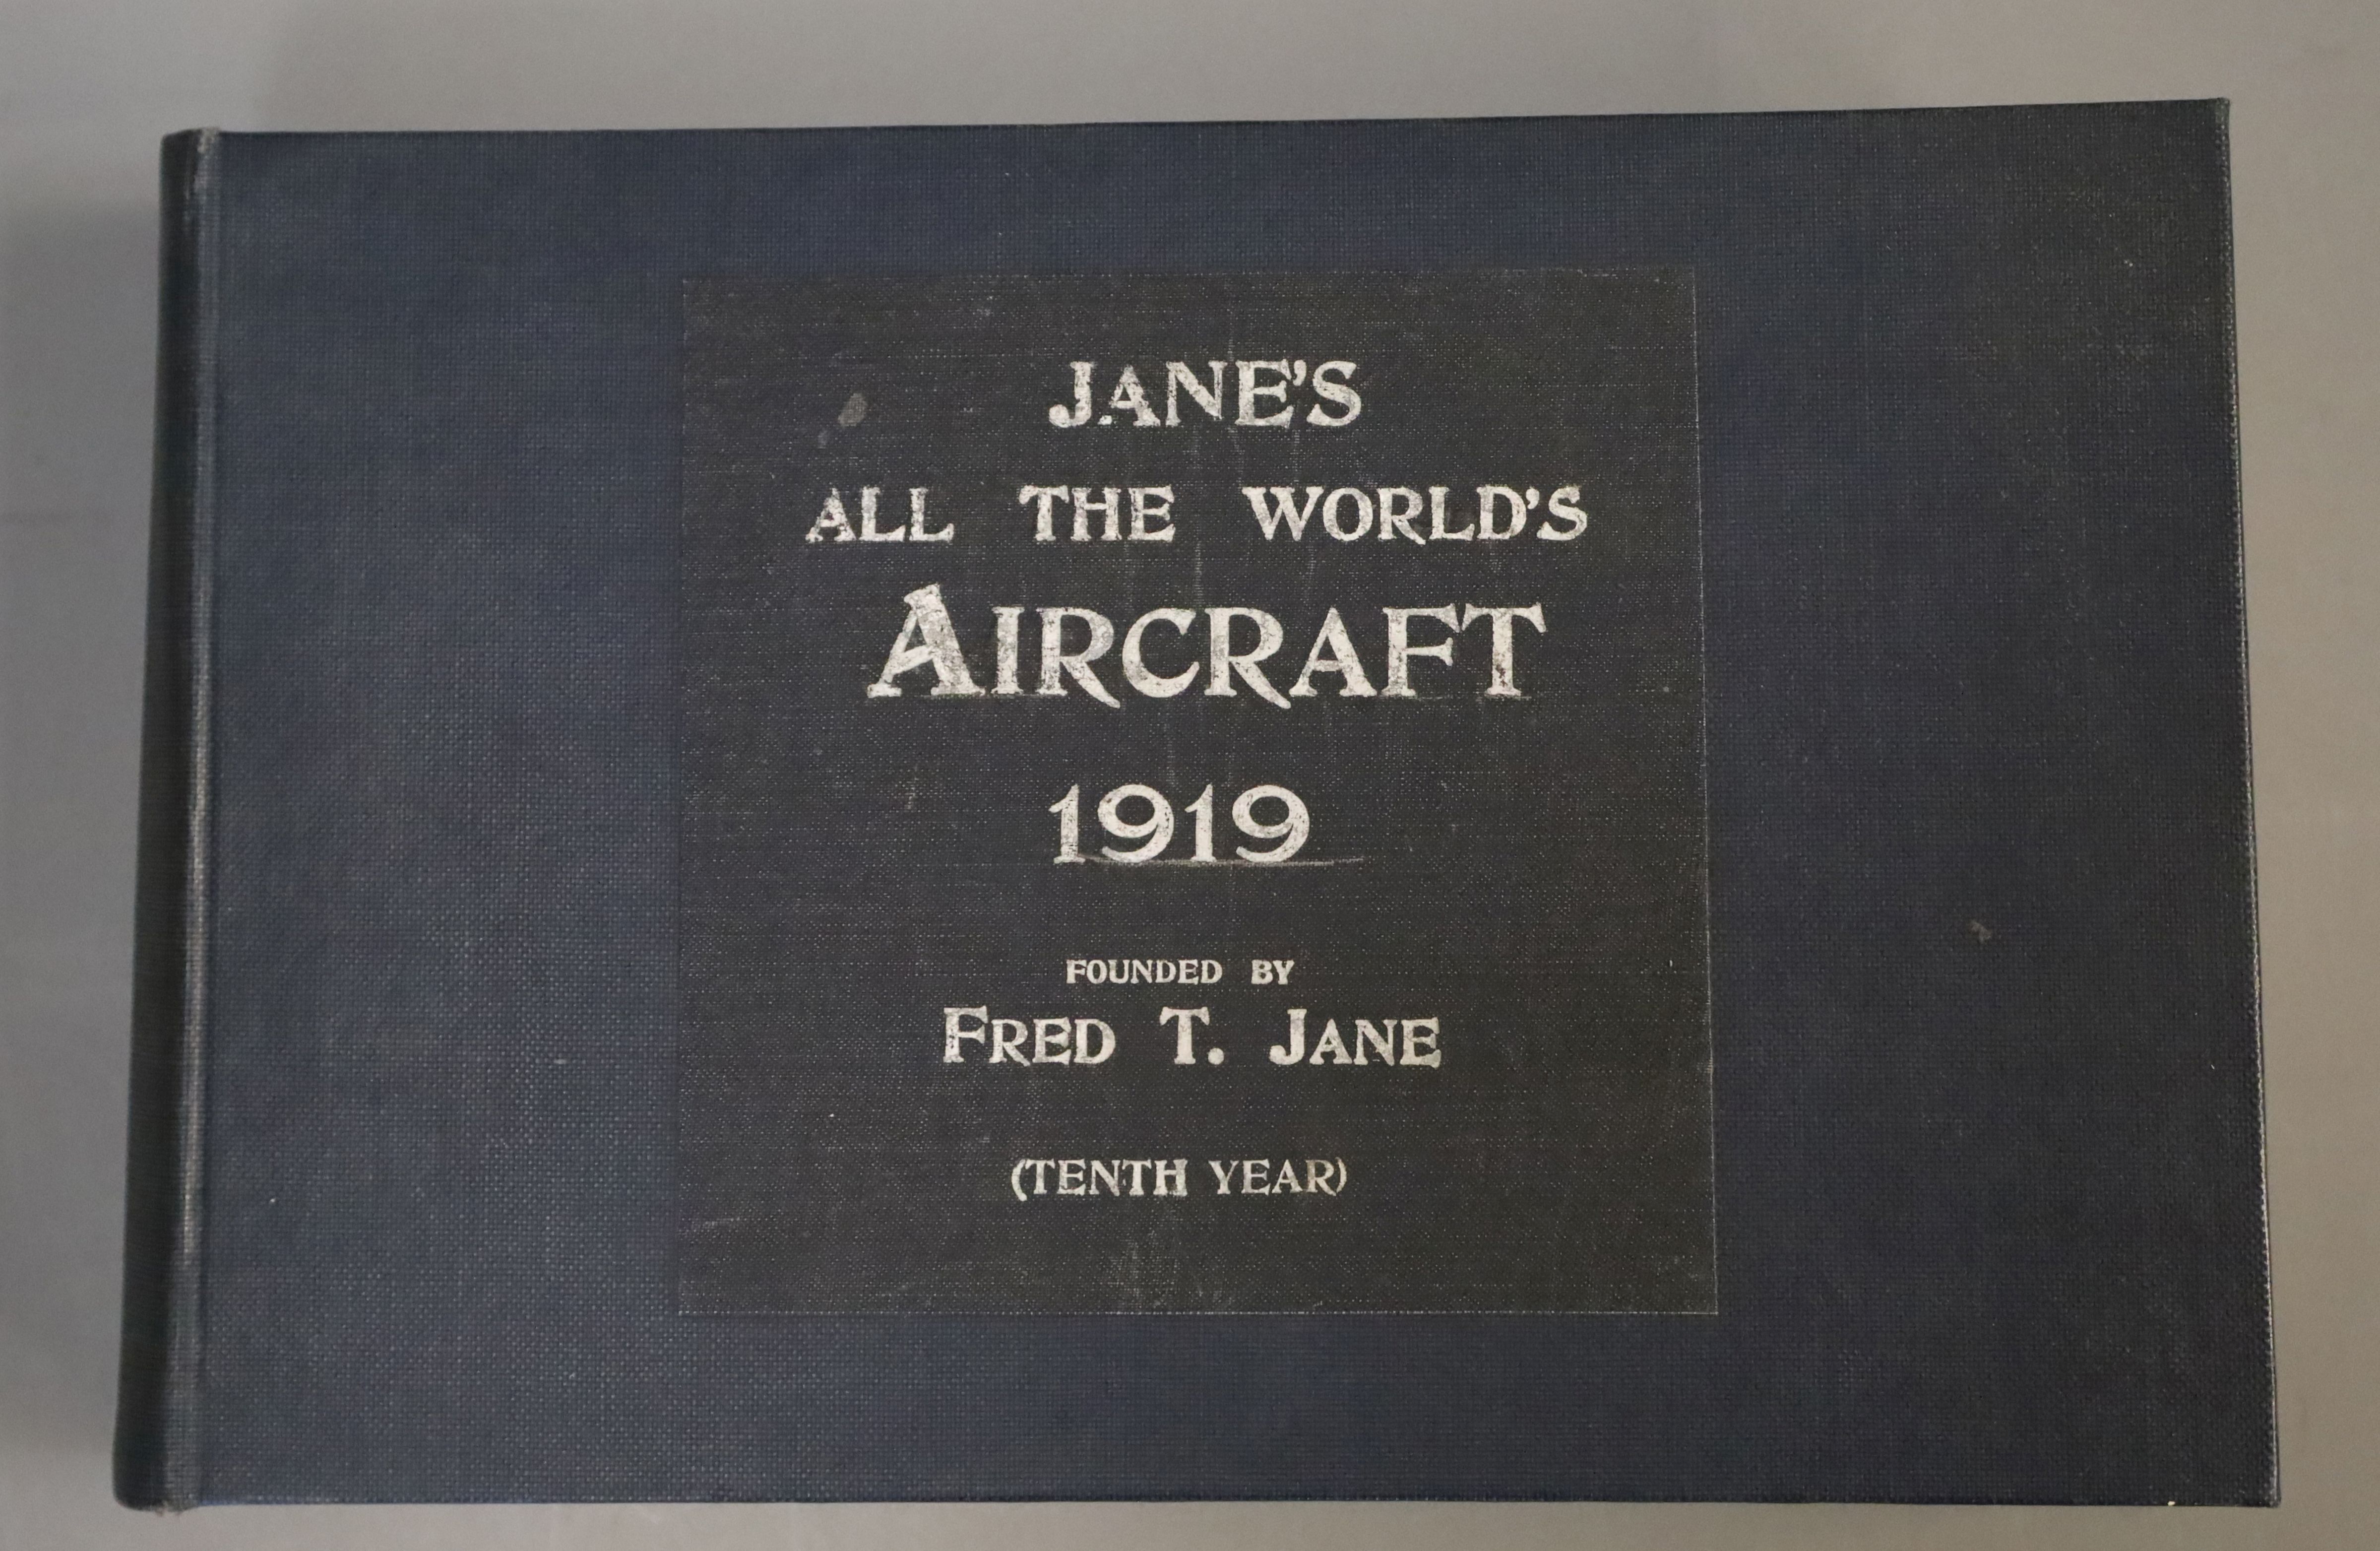 Jane's - Jane's All the World's Aircraft, oblong qto, cloth, London 1919